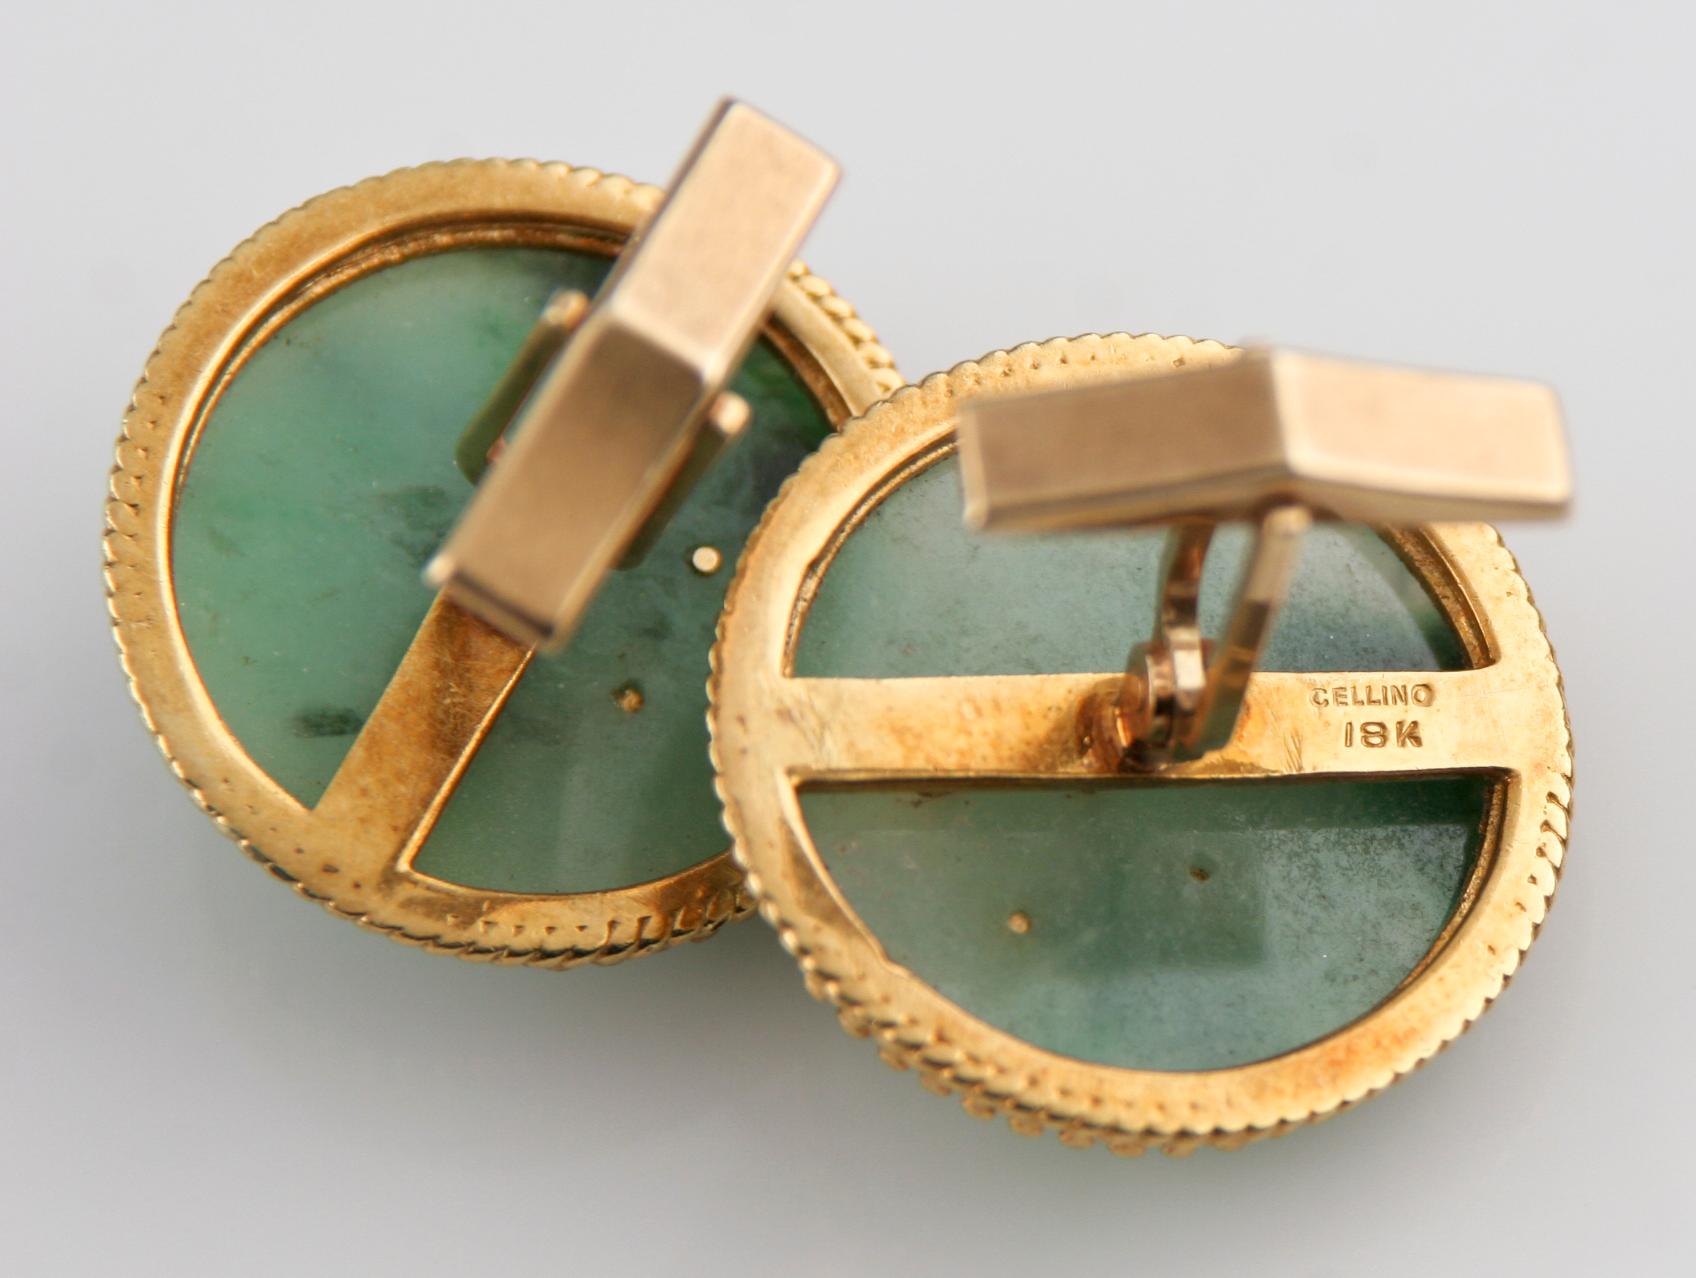 Cellino Imperial Jade 18 Karat and 14 Karat Round Yellow Gold Cufflinks In Excellent Condition For Sale In Sherman Oaks, CA